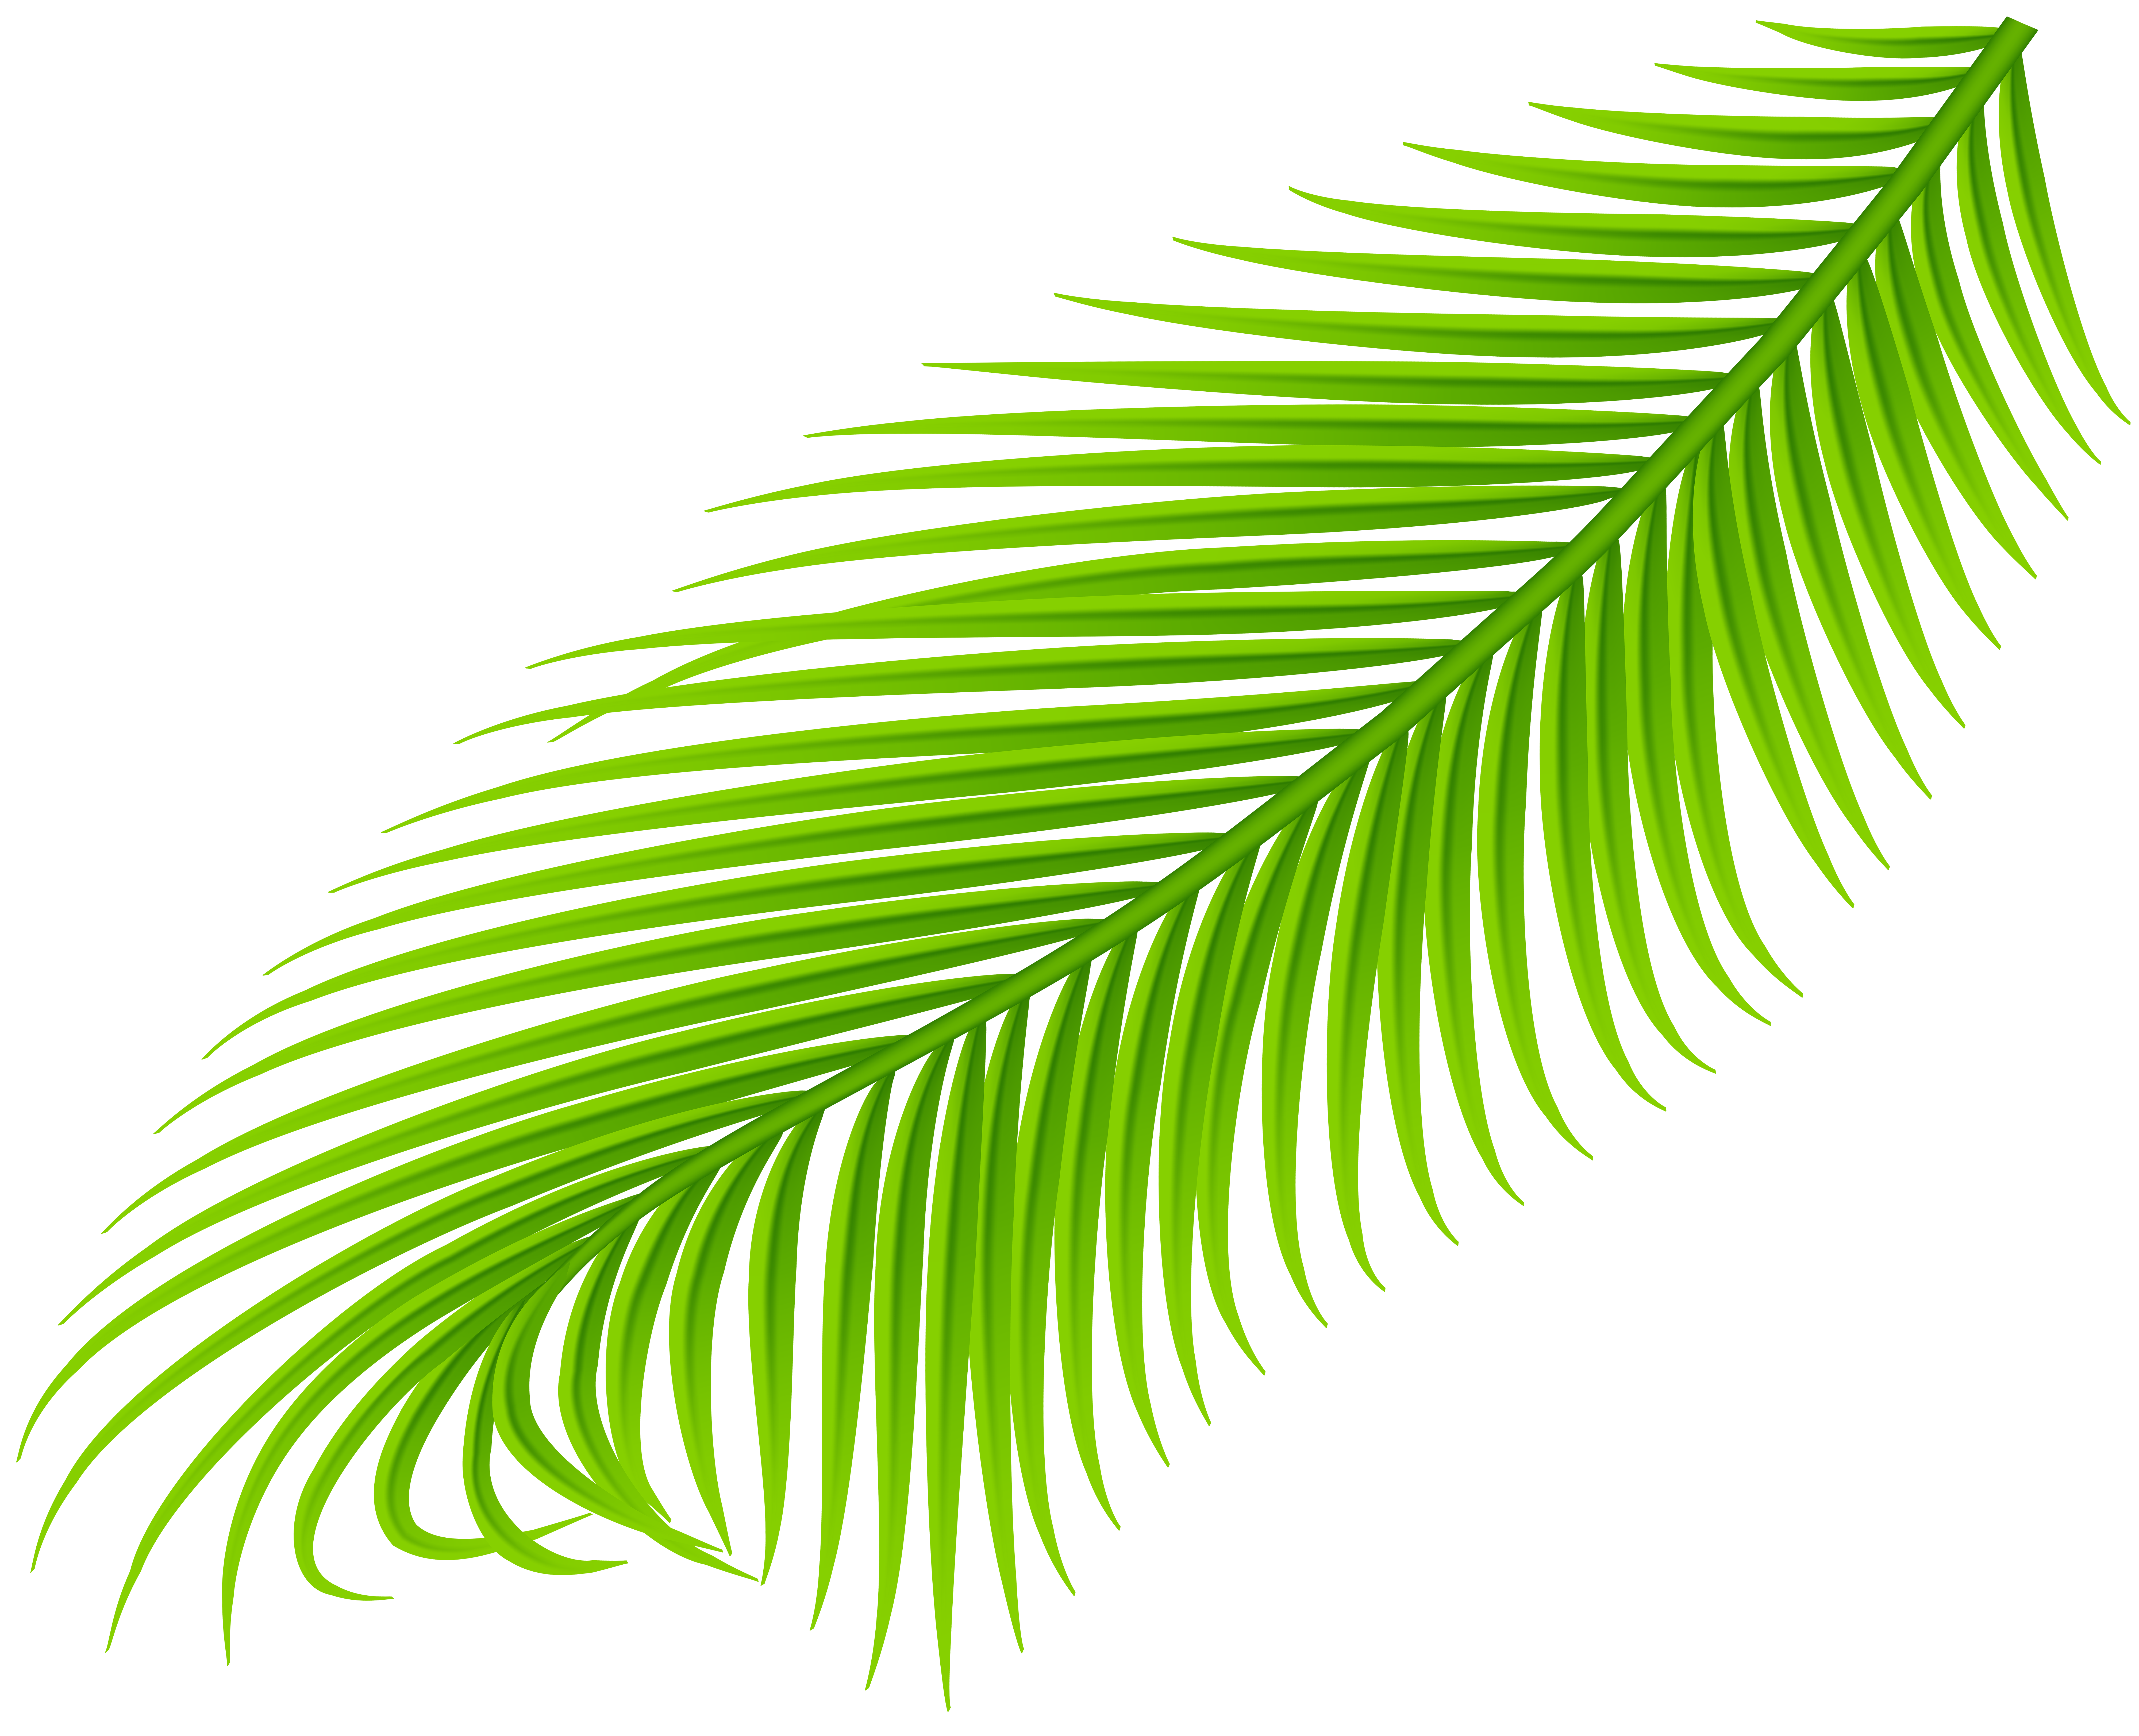 Palm Branch Vector At Collection Of Palm Branch